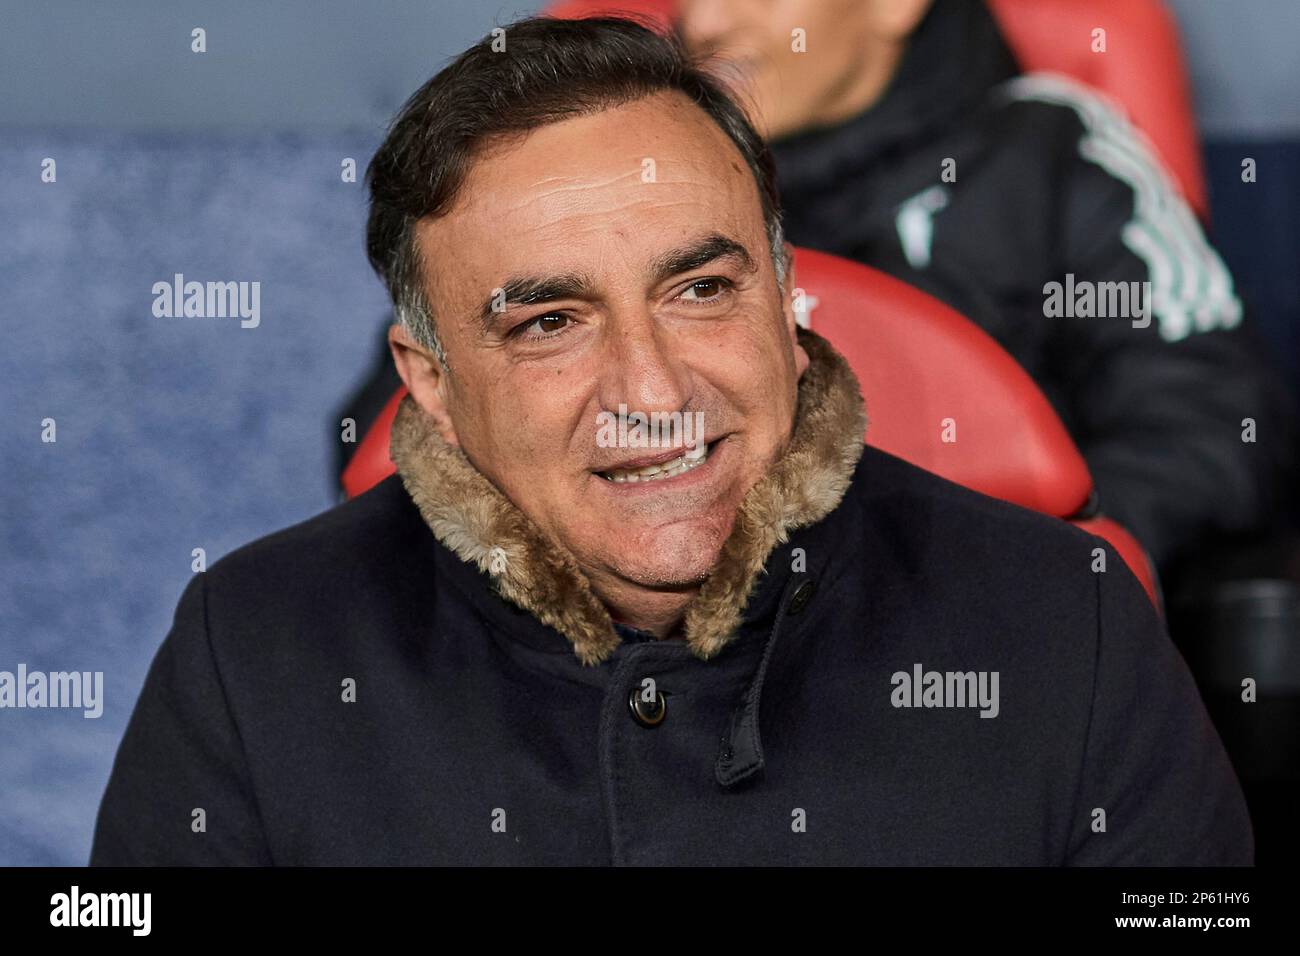 Pamplona, Spain. March 6, 2023 RC Celta head coach Carlos Carvalhal during the La Liga match between CA Osasuna and RC Celta played at El Sadar Stadium on March 6, 2023 in Pamplona, Spain. (Photo by Cesar Ortiz / PRESSIN) Stock Photo